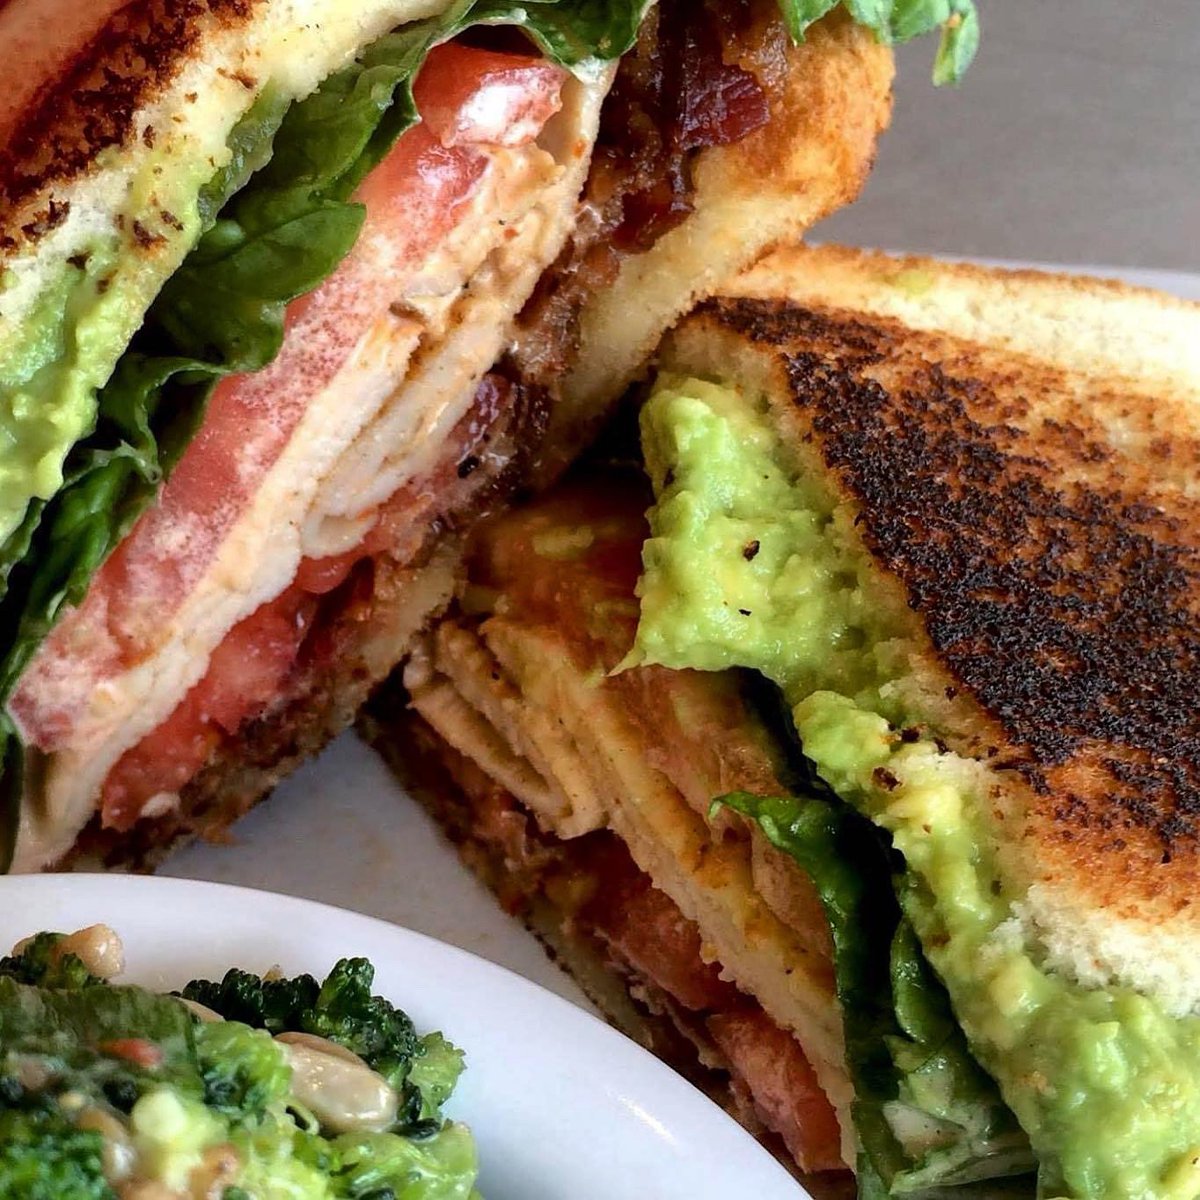 Add our BALT to your Saturday afternoon!!! 🥓 🥑 🥬 🍅 👉 Applewood bacon, avocado, lettuce, tomatoes and aioli on toasted white bread…YUM!! We suggest adding our smoked turkey…even better!!! #urbancookhouse #eatfresh #UC #buylocaleaturban